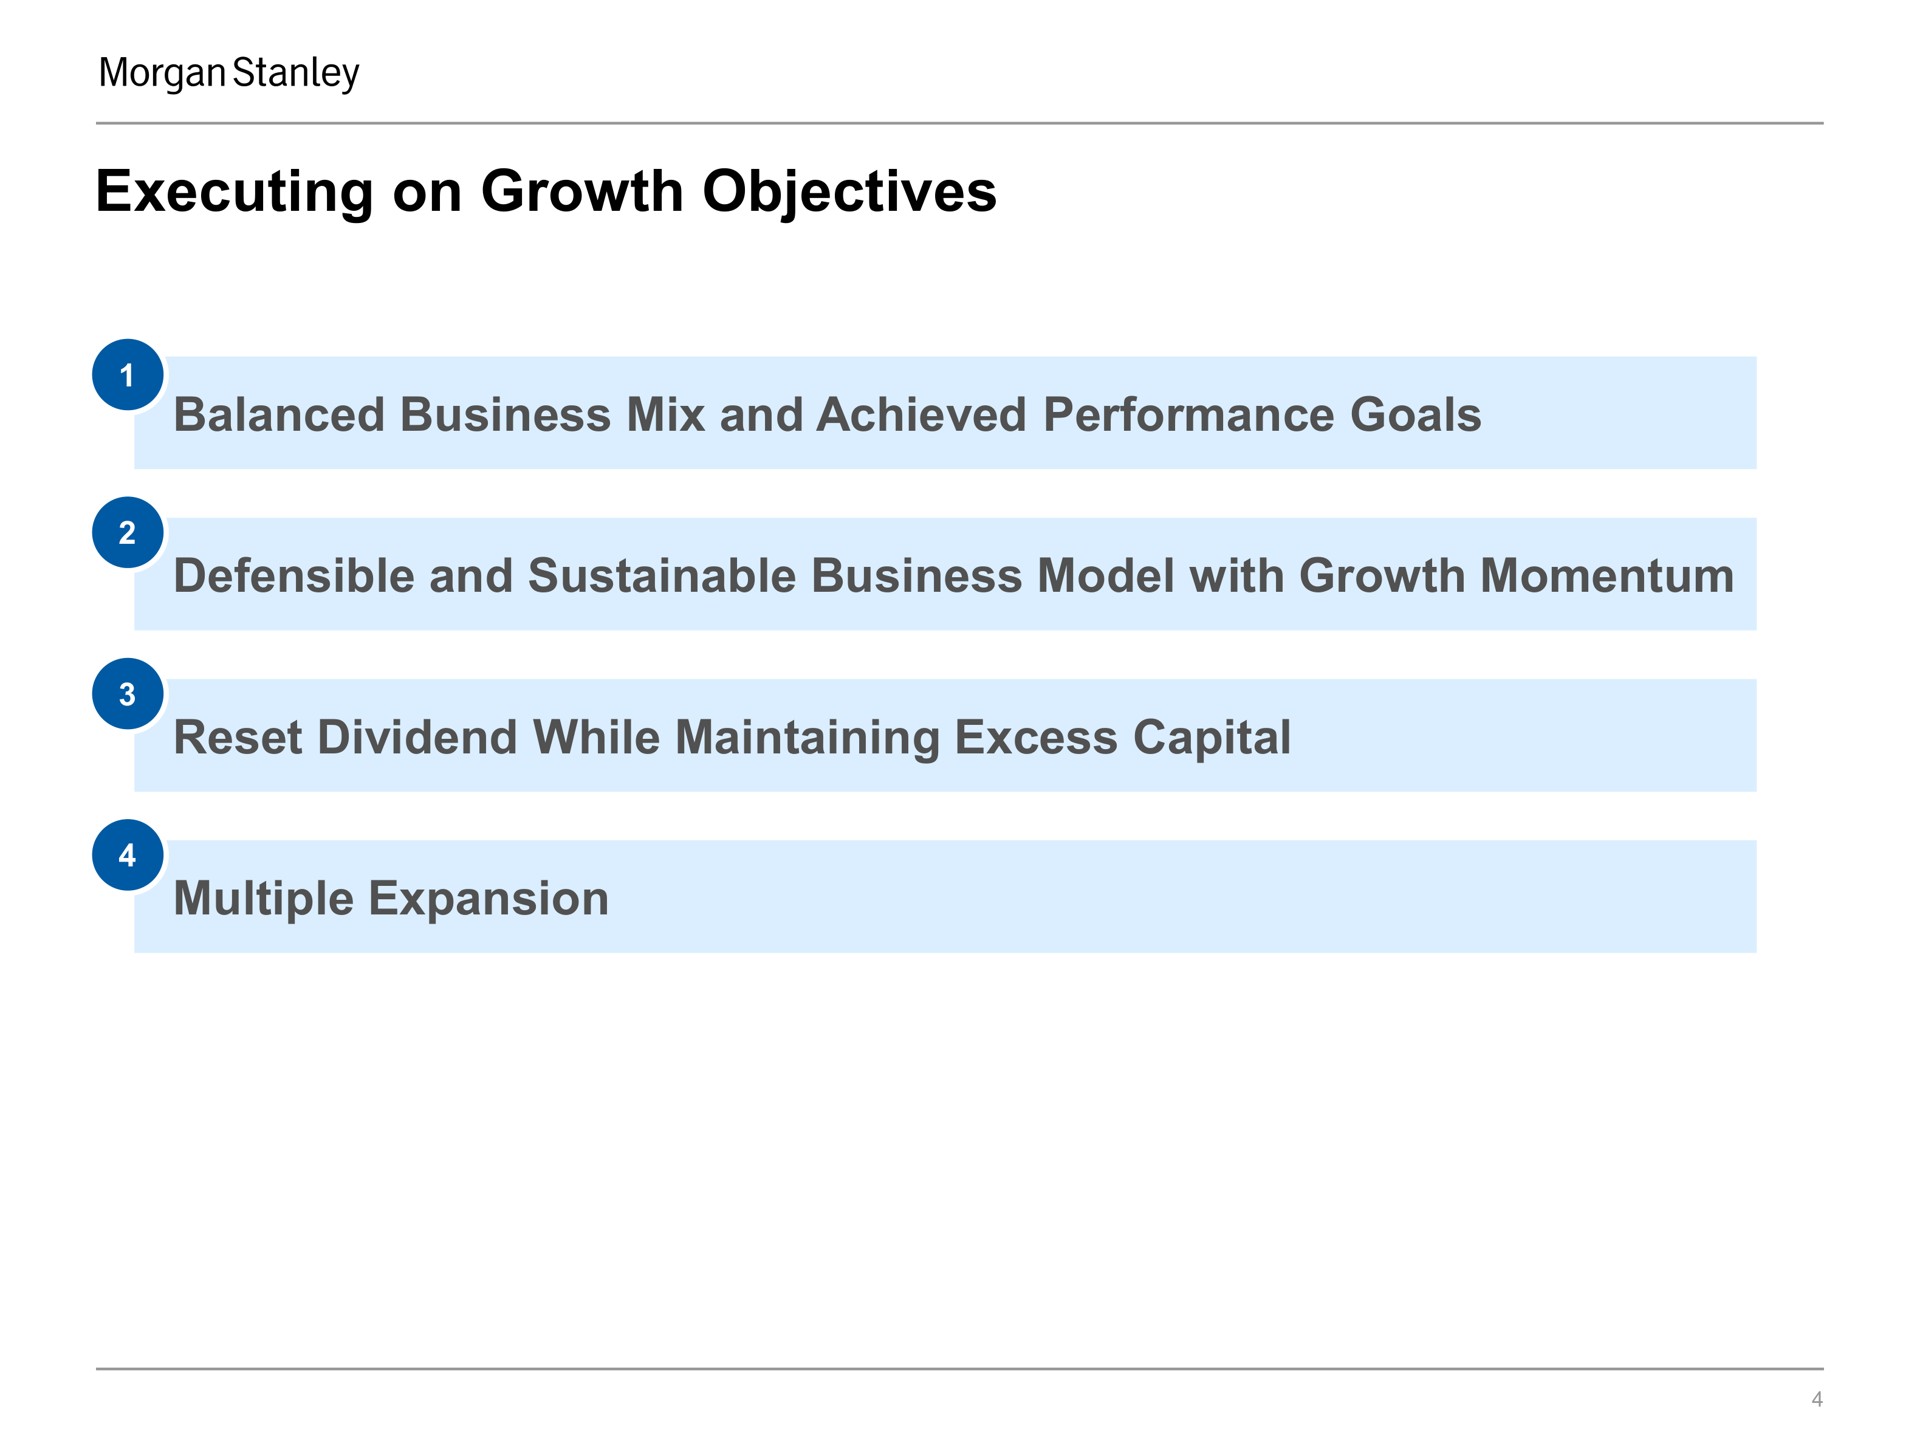 executing on growth objectives balanced business mix and achieved performance goals defensible and sustainable business model with growth momentum reset dividend while maintaining excess capital multiple expansion | Morgan Stanley